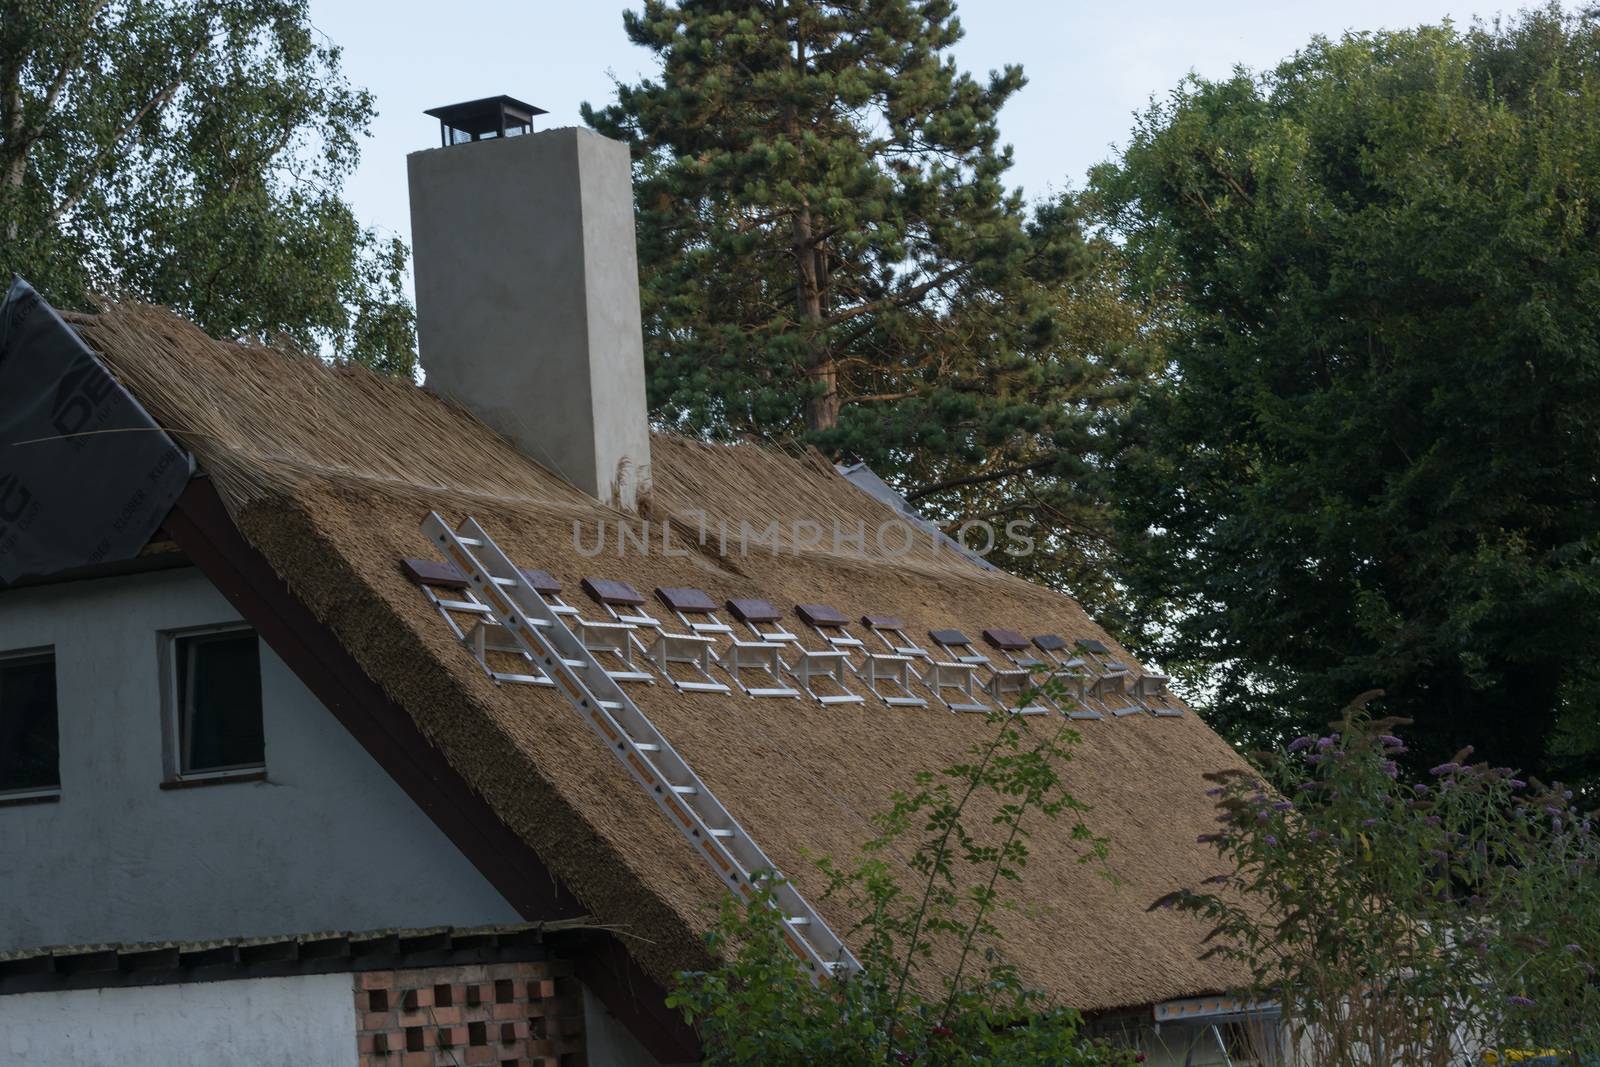 Professional execution of a repairs to a thatched roof